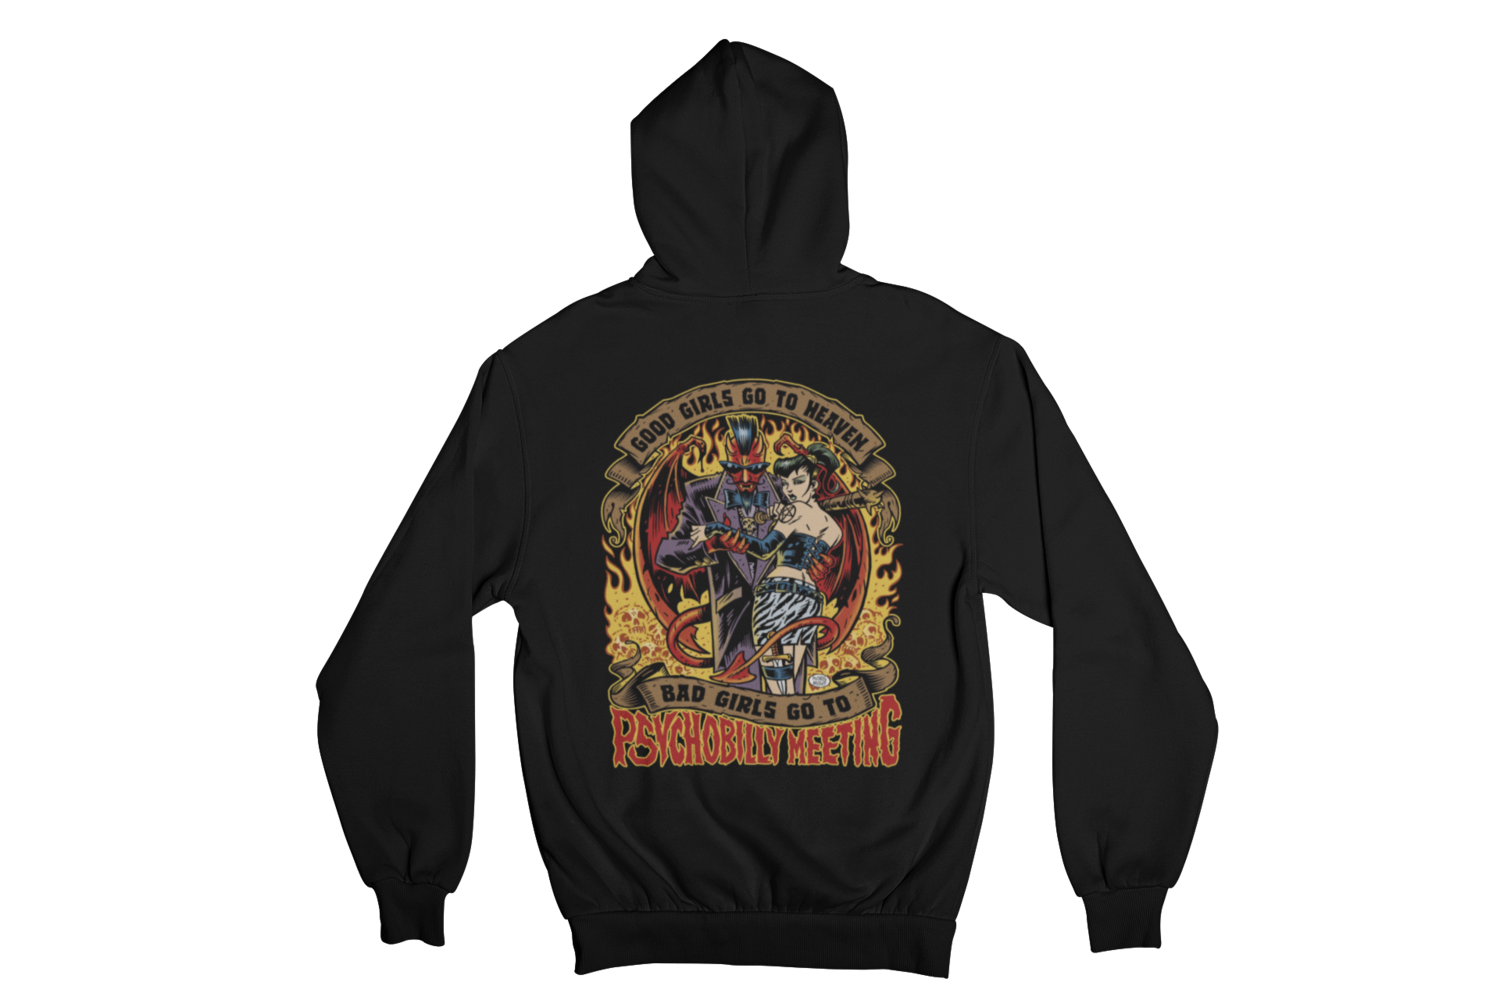 BAD GIRLS GO TO PSYCHOBILLY MEETING HOODIE ZIP for MEN by PASKAL